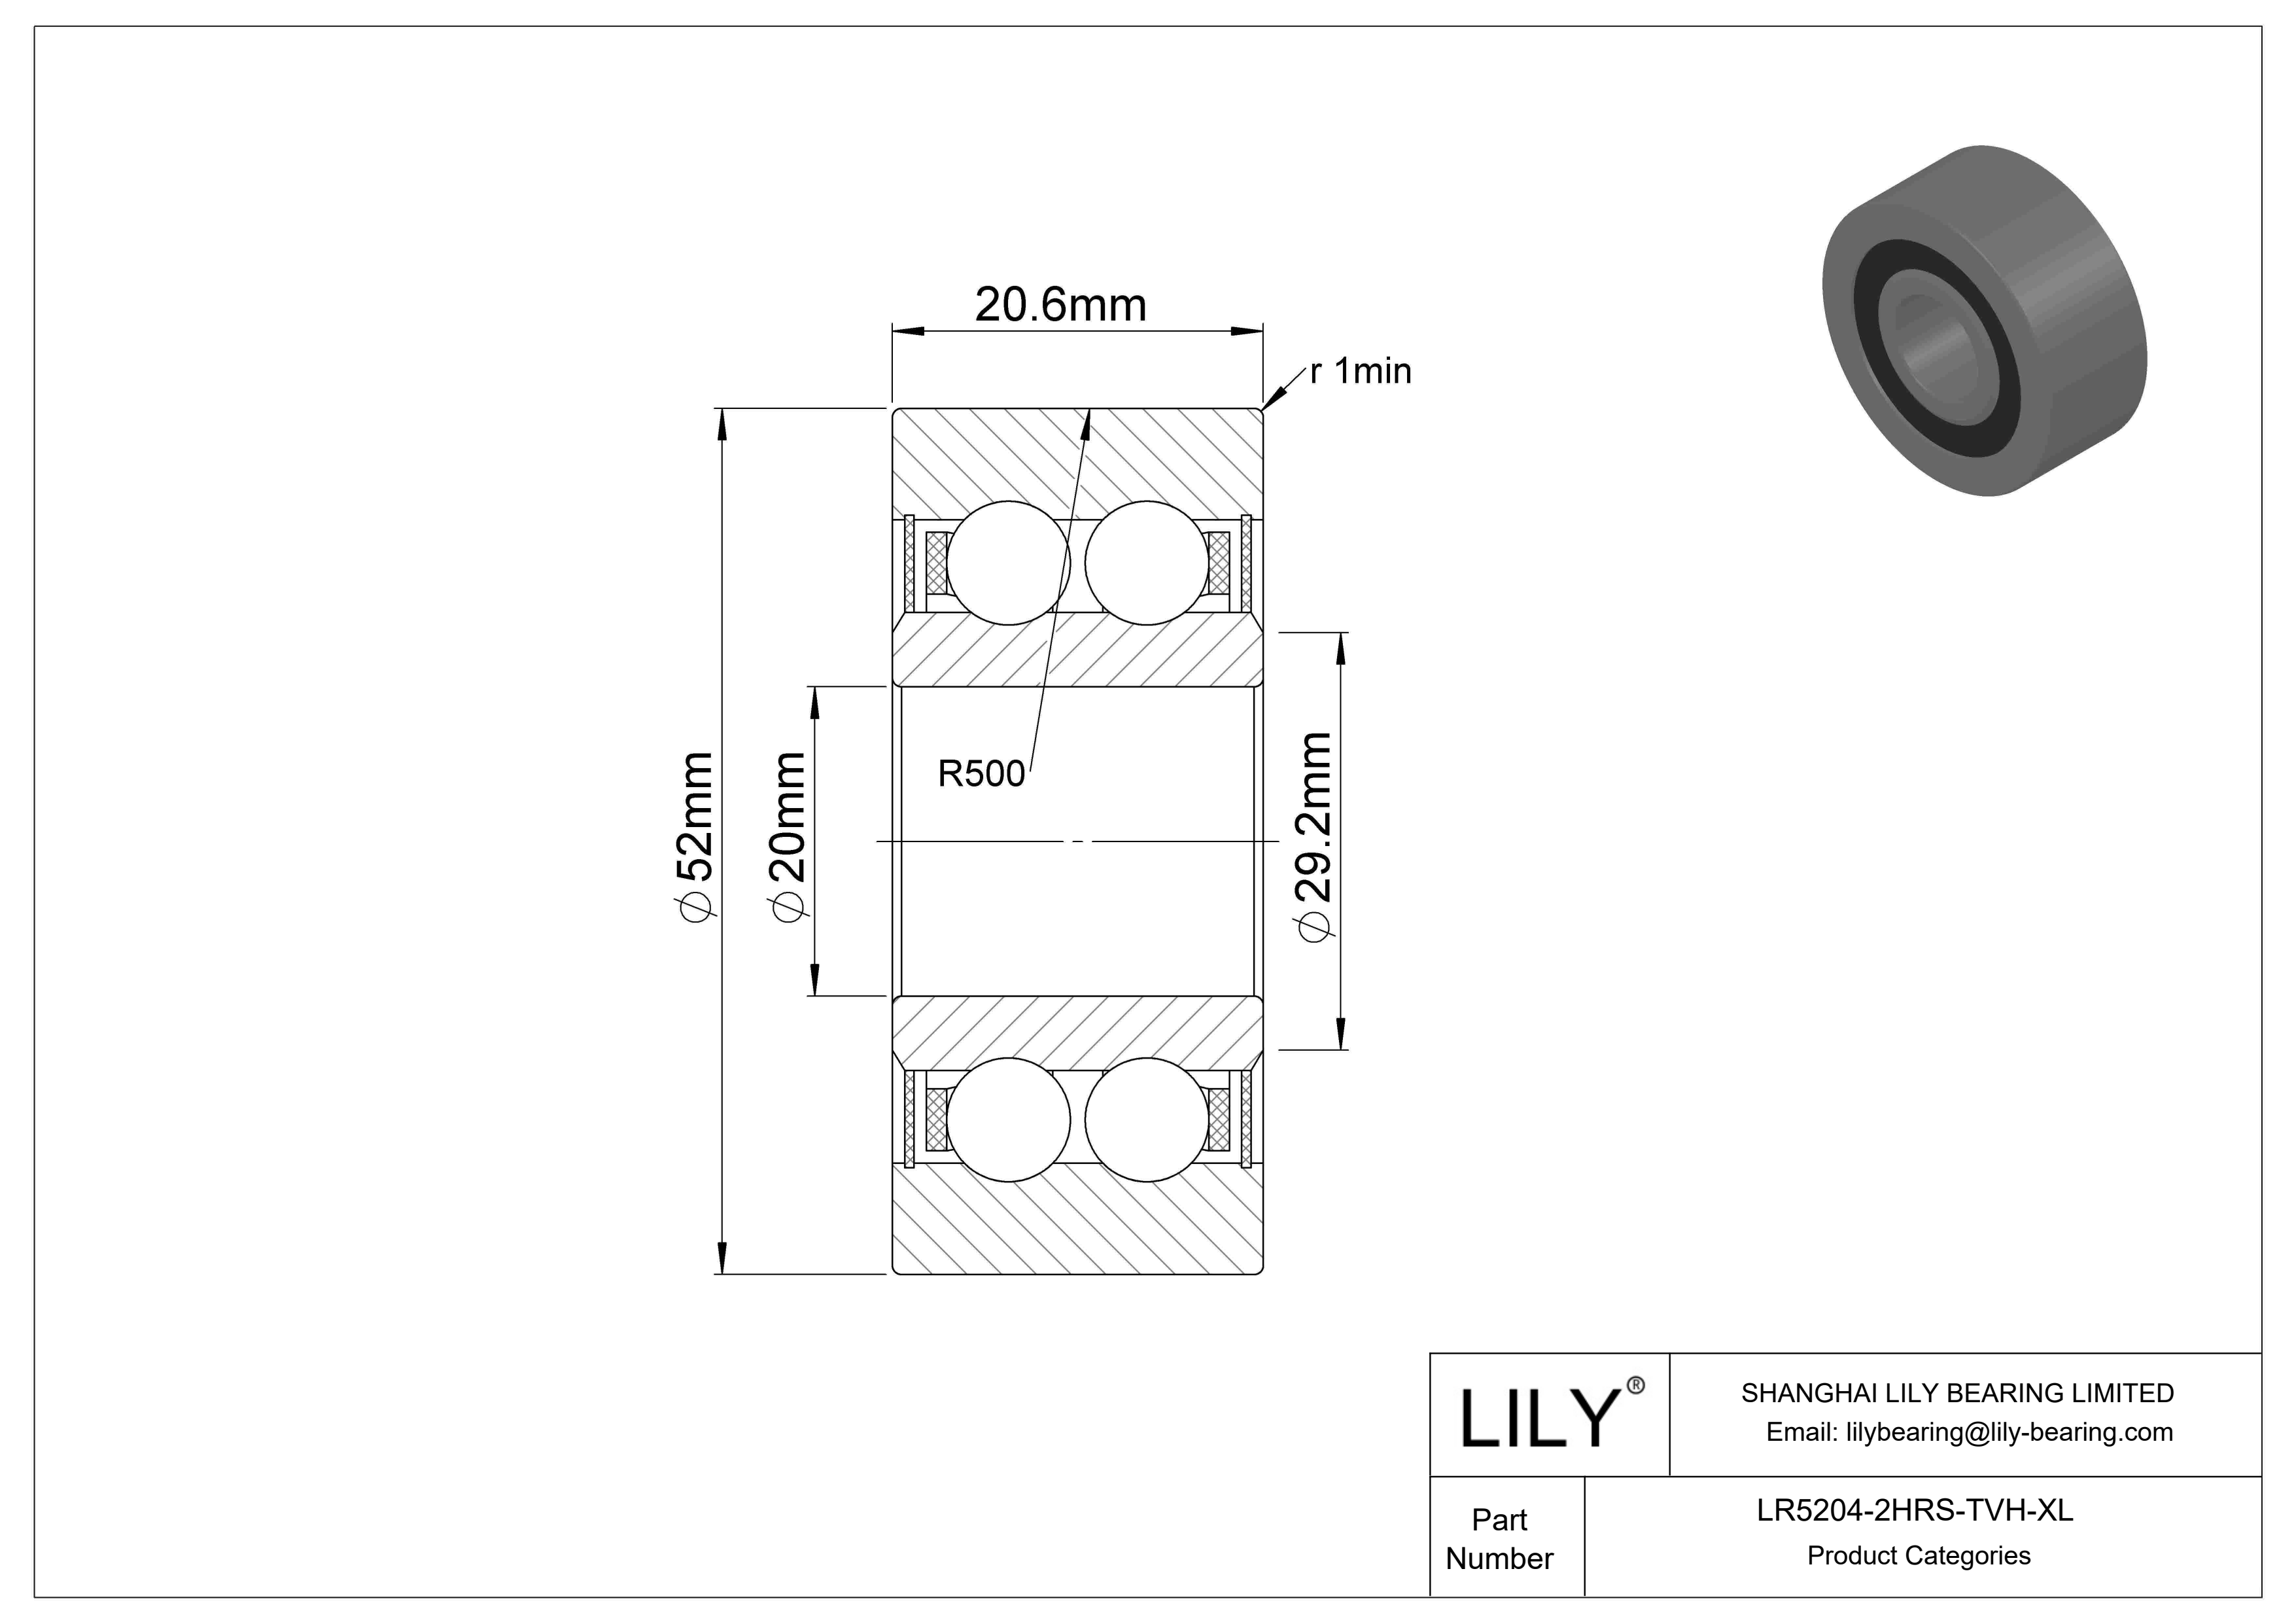 LR5204-2HRS-TVH-XL Yoke Type Track Rollers cad drawing